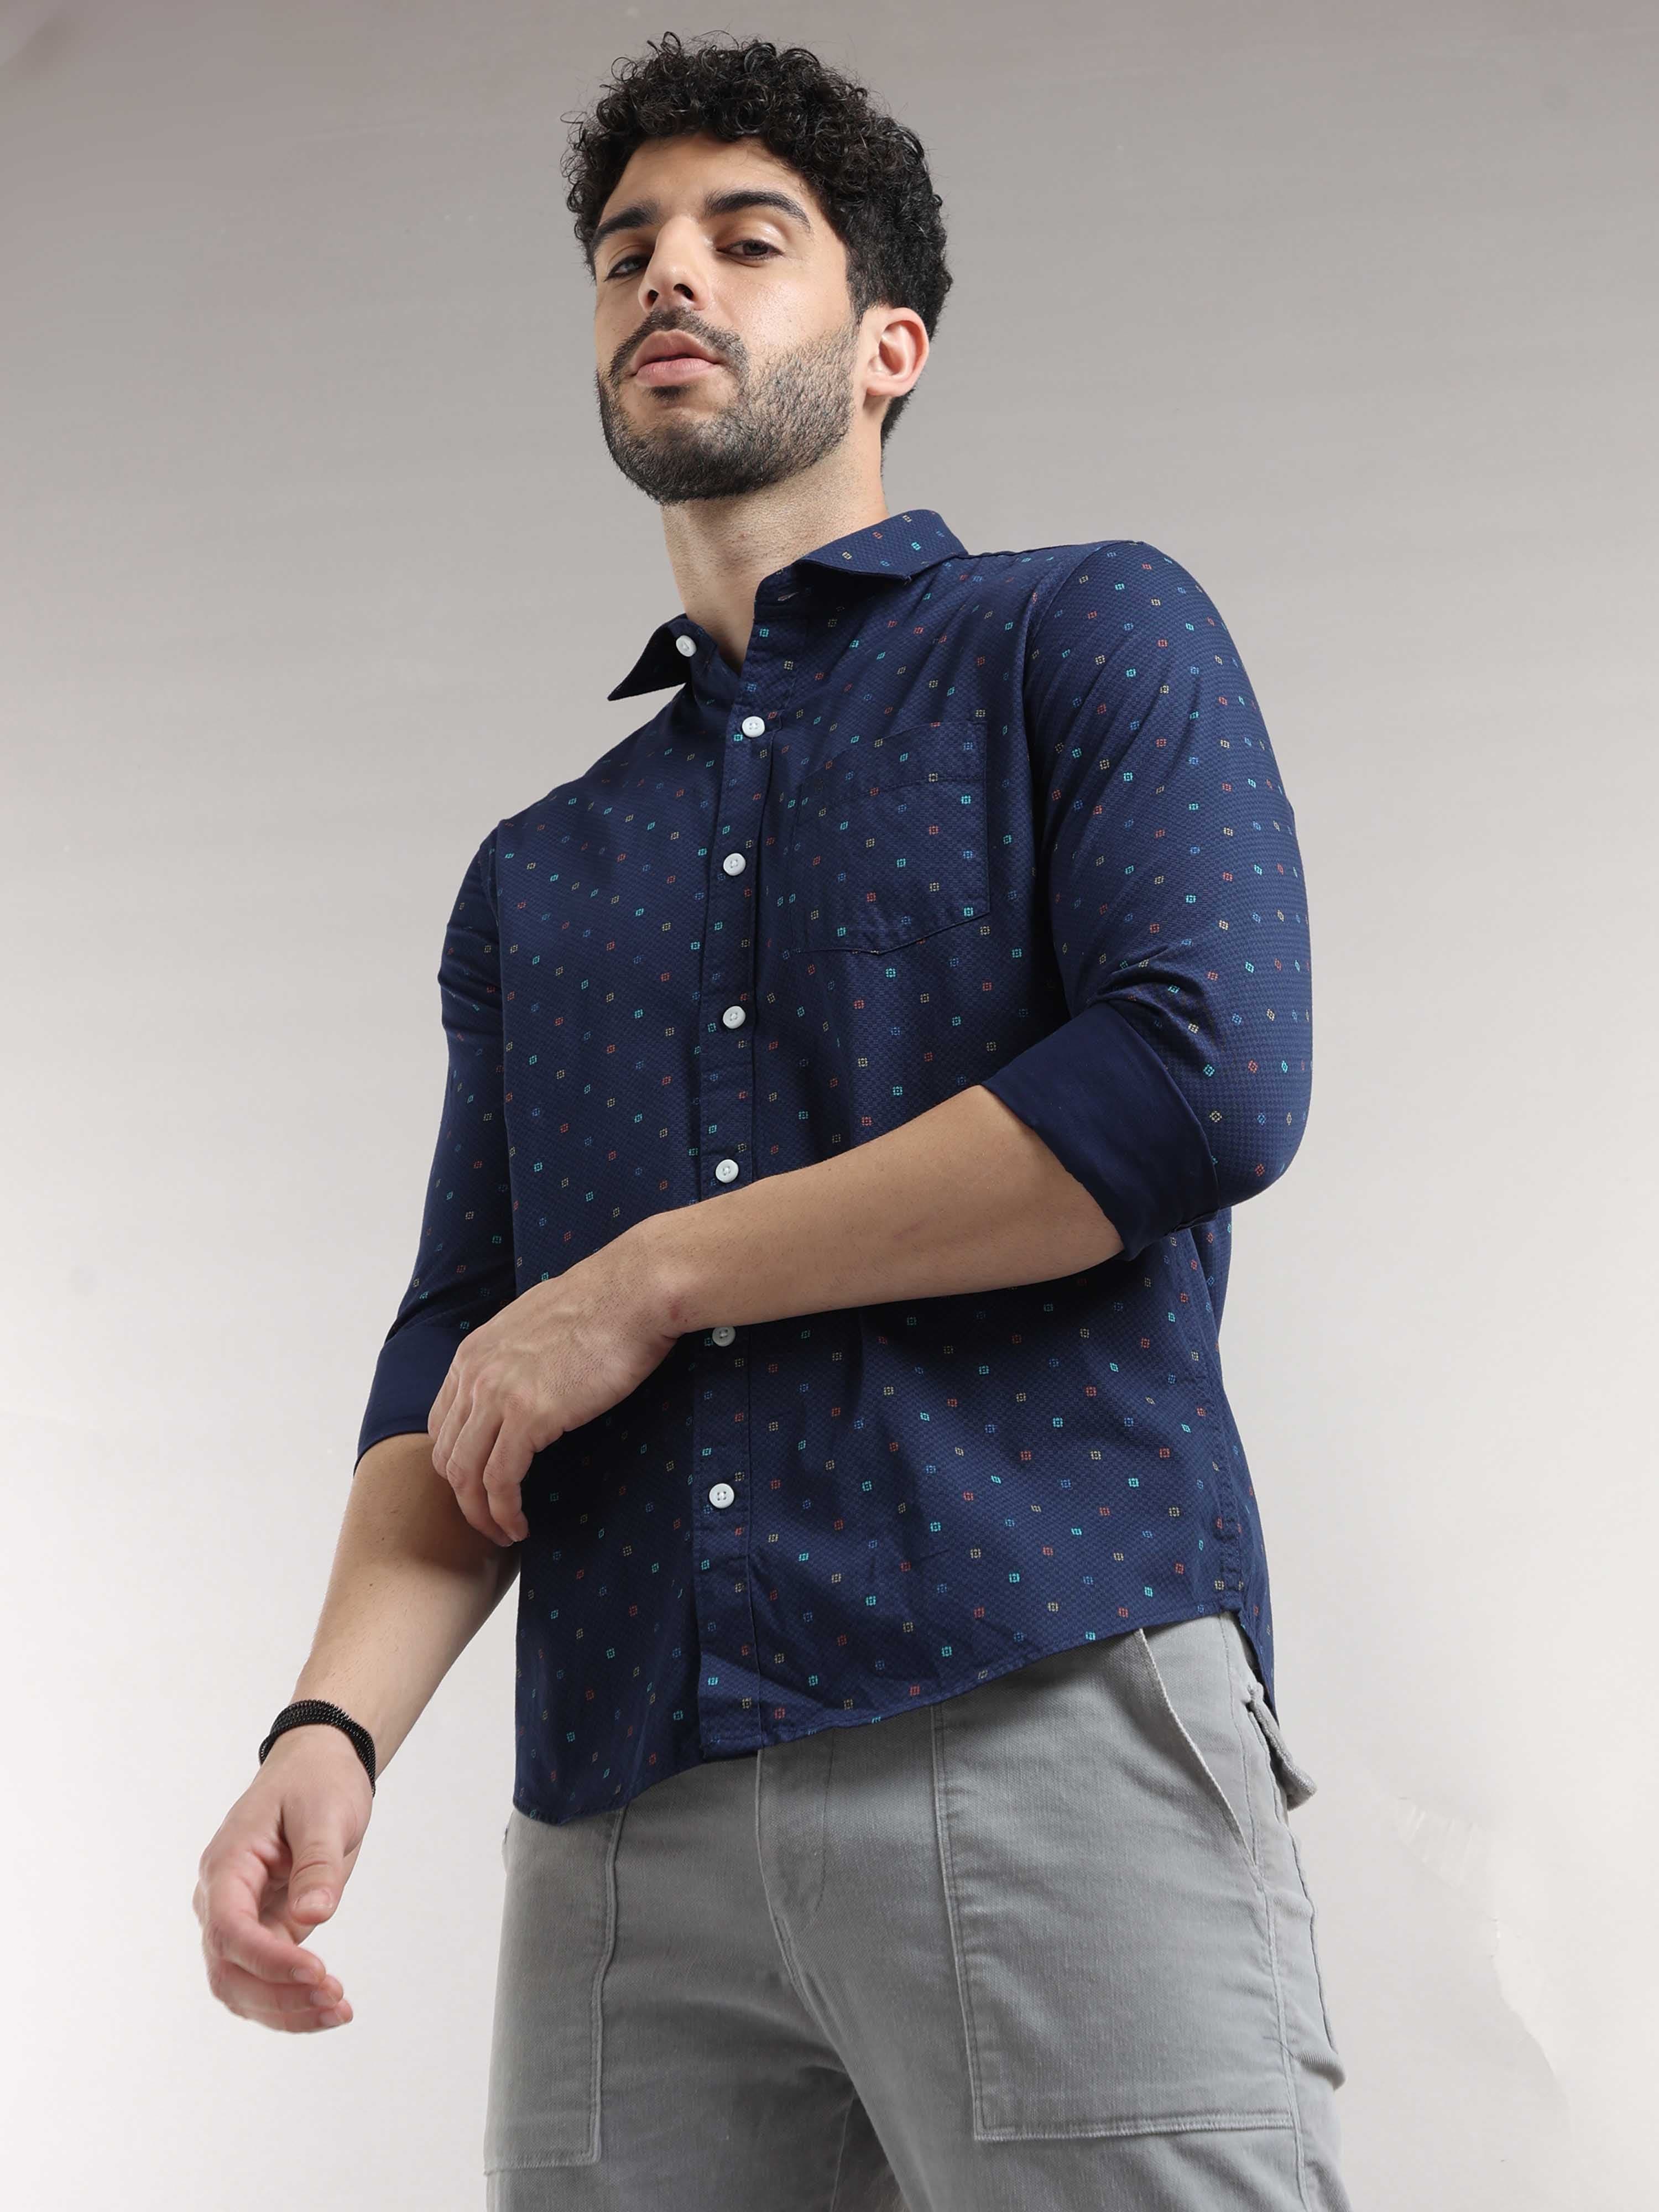 Shop Trendy Navy Blue Printed Shirt Online at Great PriceRs. 1299.00